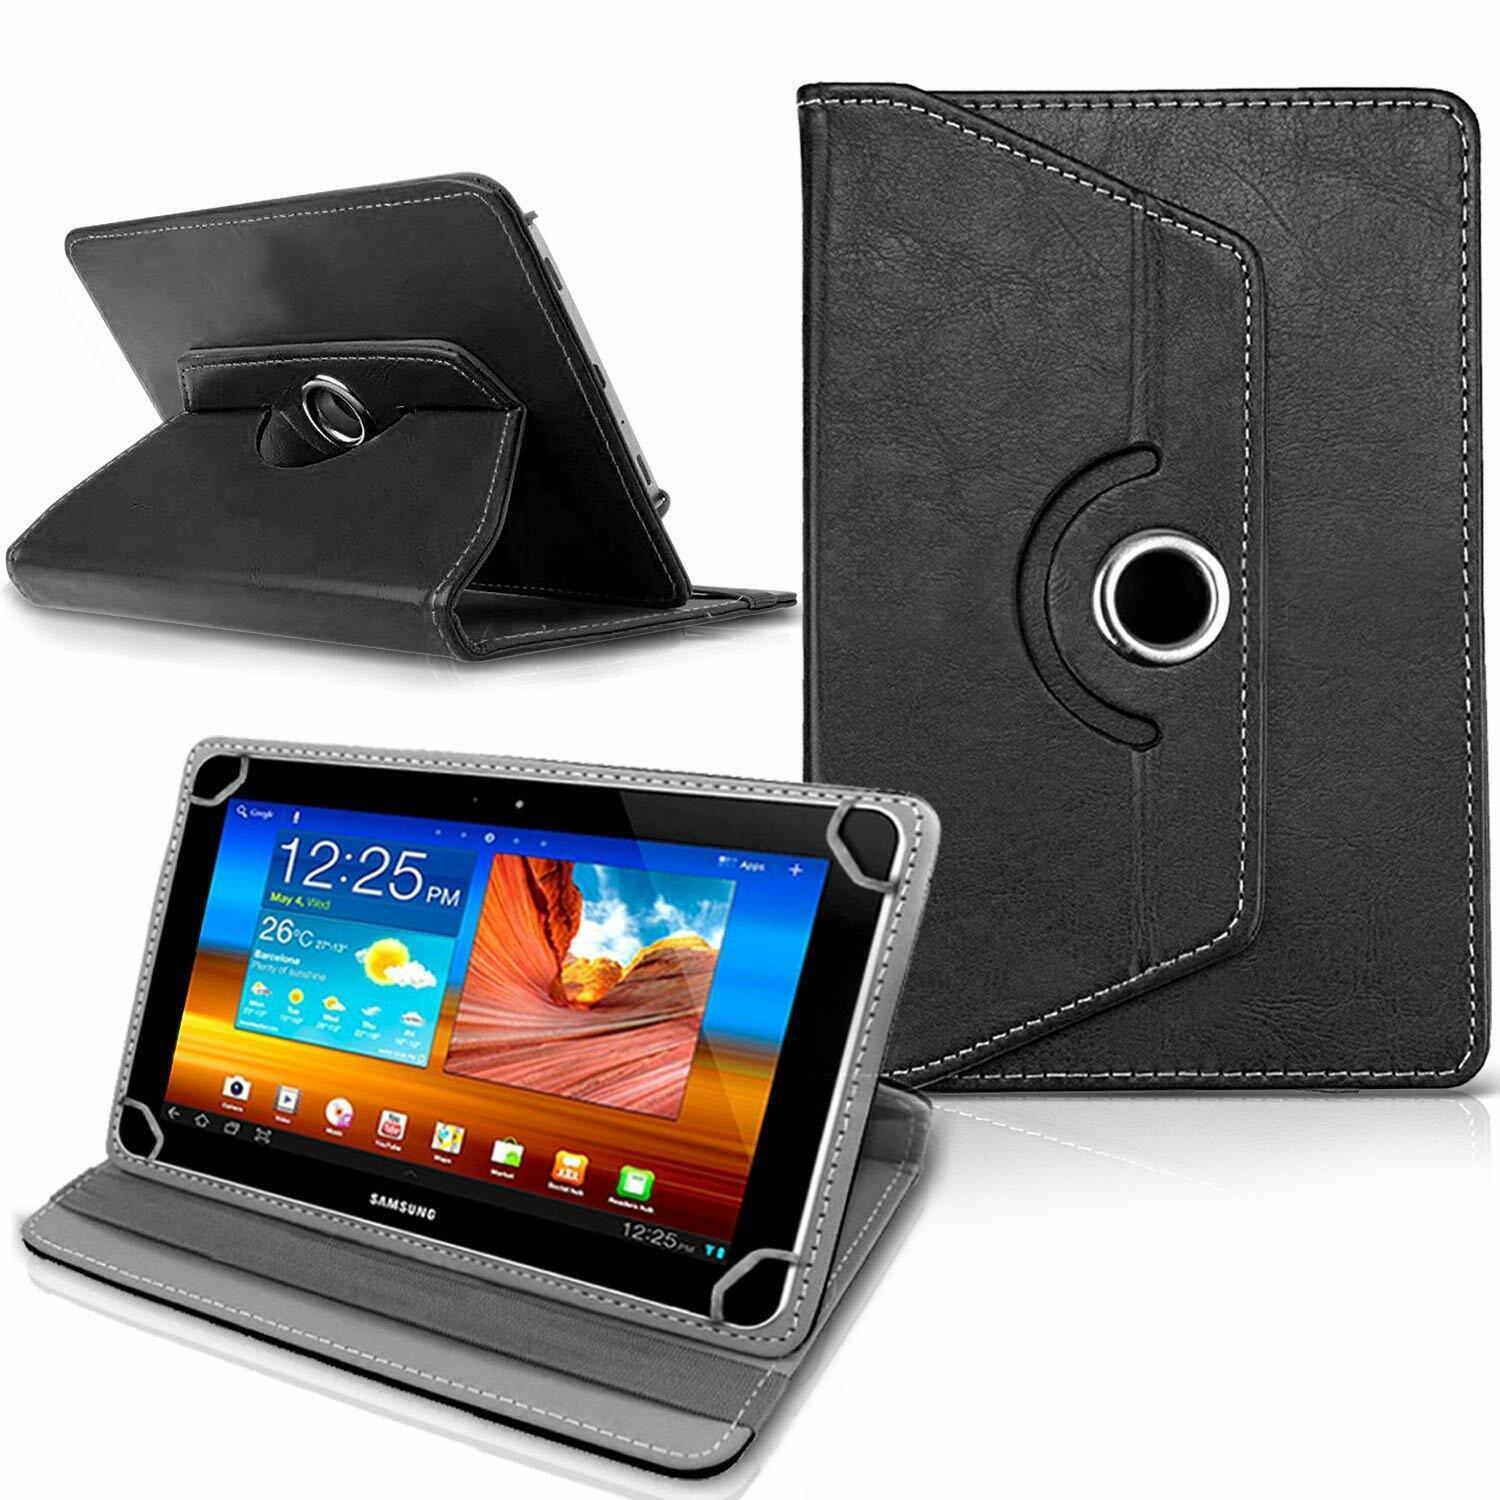 °Folding Folio 360 Rotating Stand Flip Leather Case Cover for Samsung Galaxy Tab